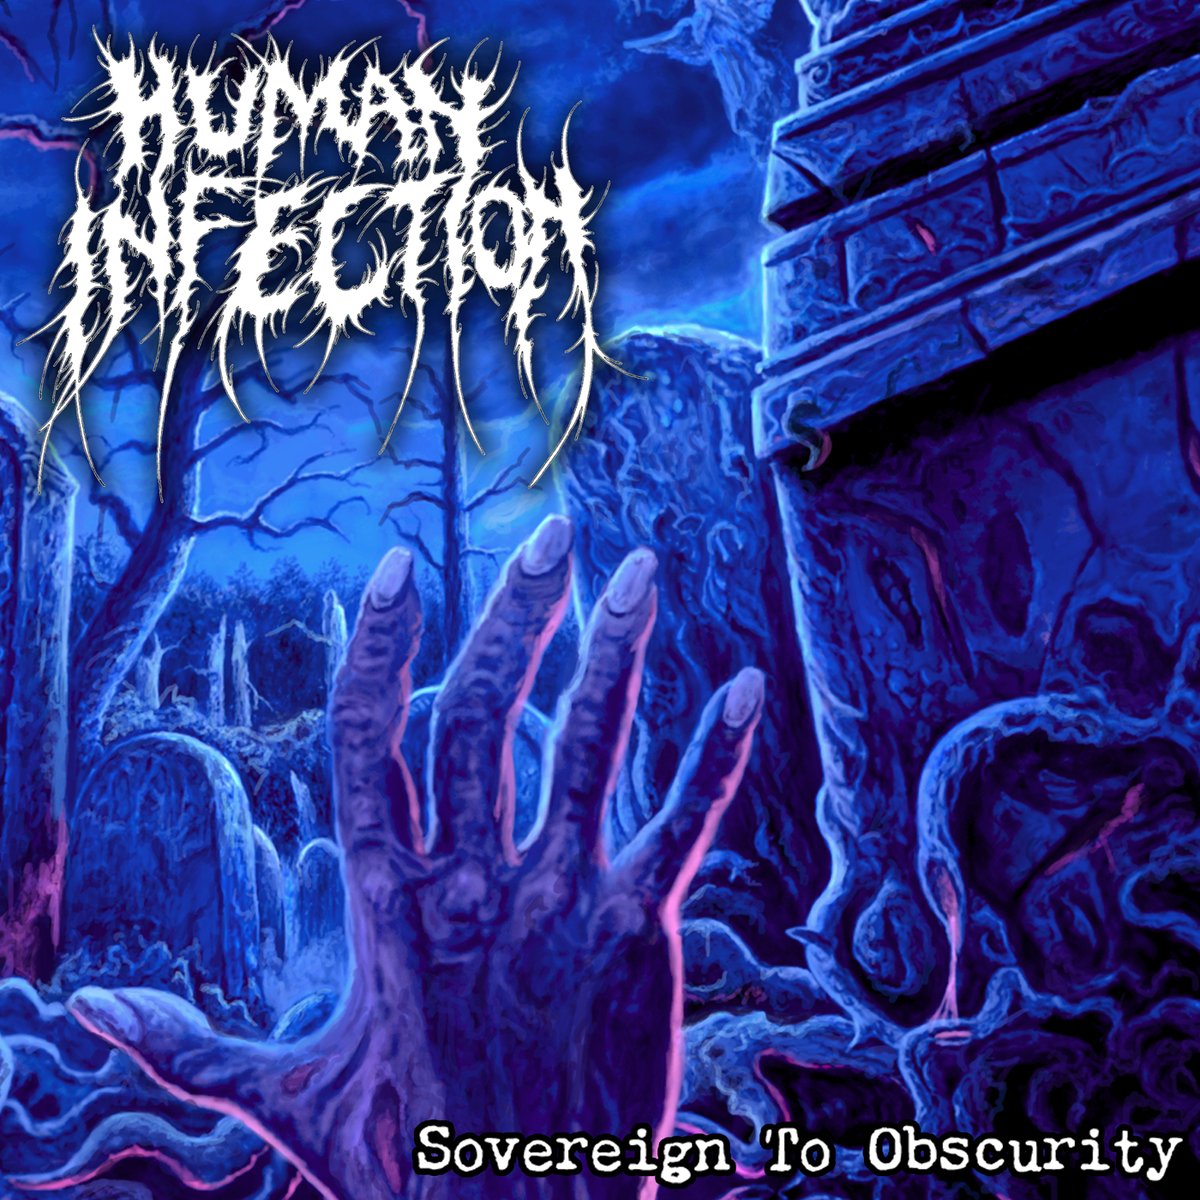 Listen to the new Human Infection single 'Sovereign To Obscurity' now on all streaming platforms and Bandcamp!

hpgd.bandcamp.com/album/gravesig…

#humaninfection #deathmetal #cannibalcorpse #suffocation #morbidangel #hateeternal #krisiun #obituary #skeletalremains #vader #deicide #coffins